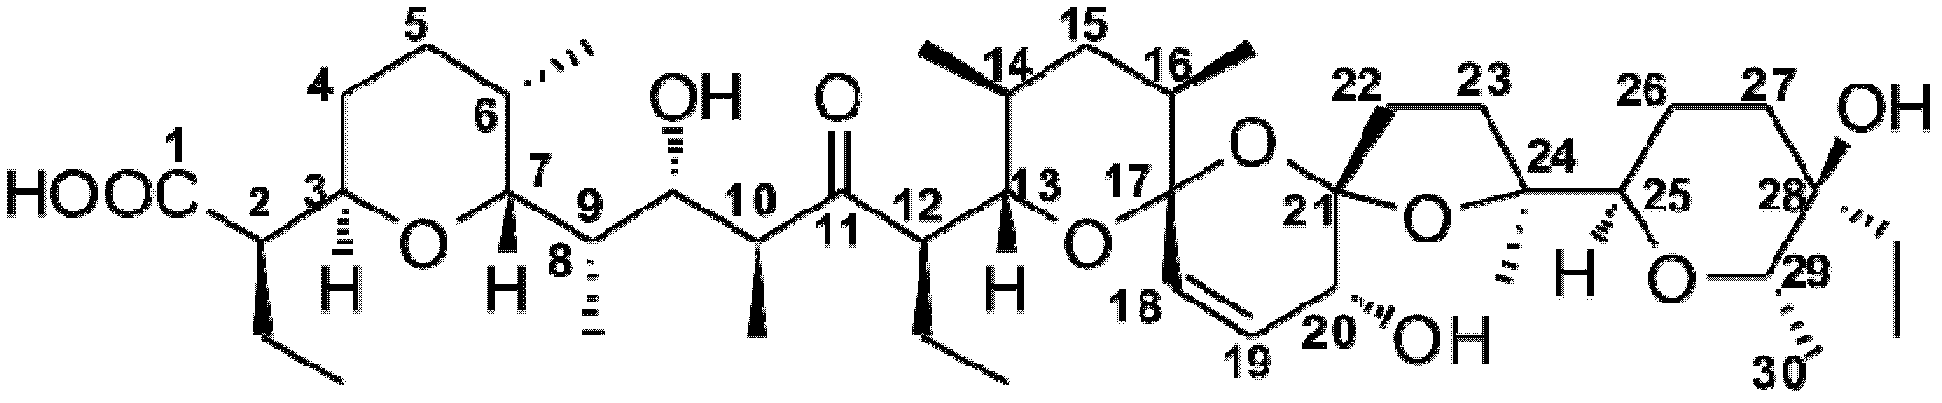 Biosynthetic gene cluster of salinomycin and application thereof